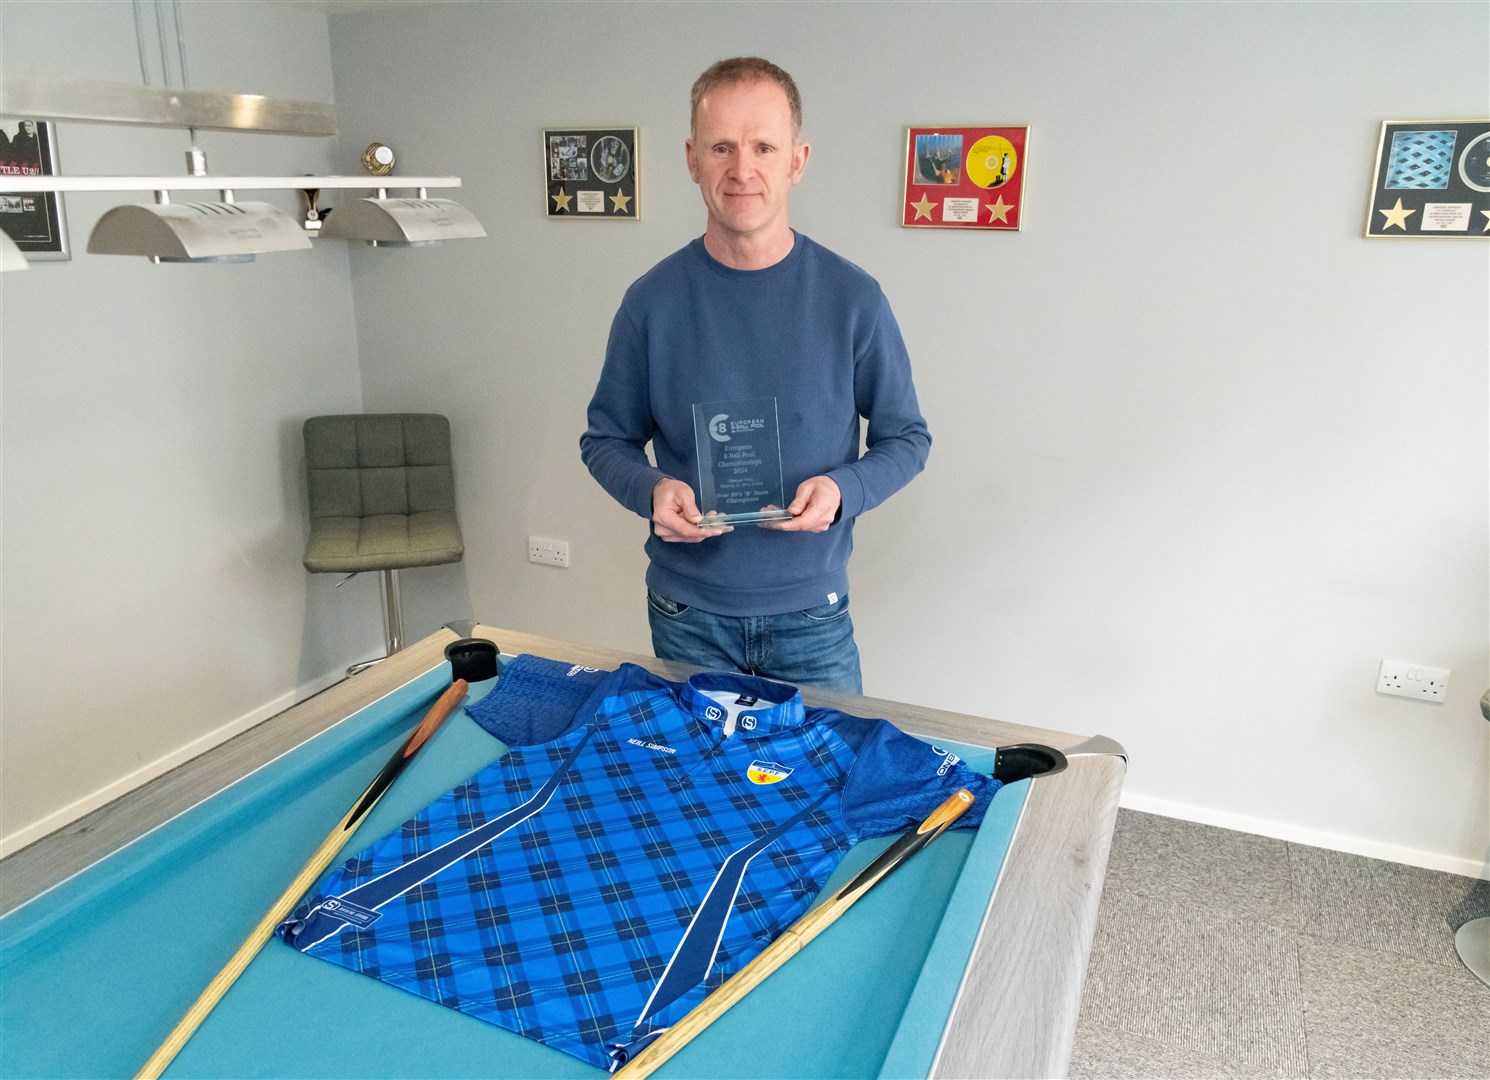 Elgin pool player, Neill Simpson, with the shirt he wore at the competition. Picture: Beth Taylor